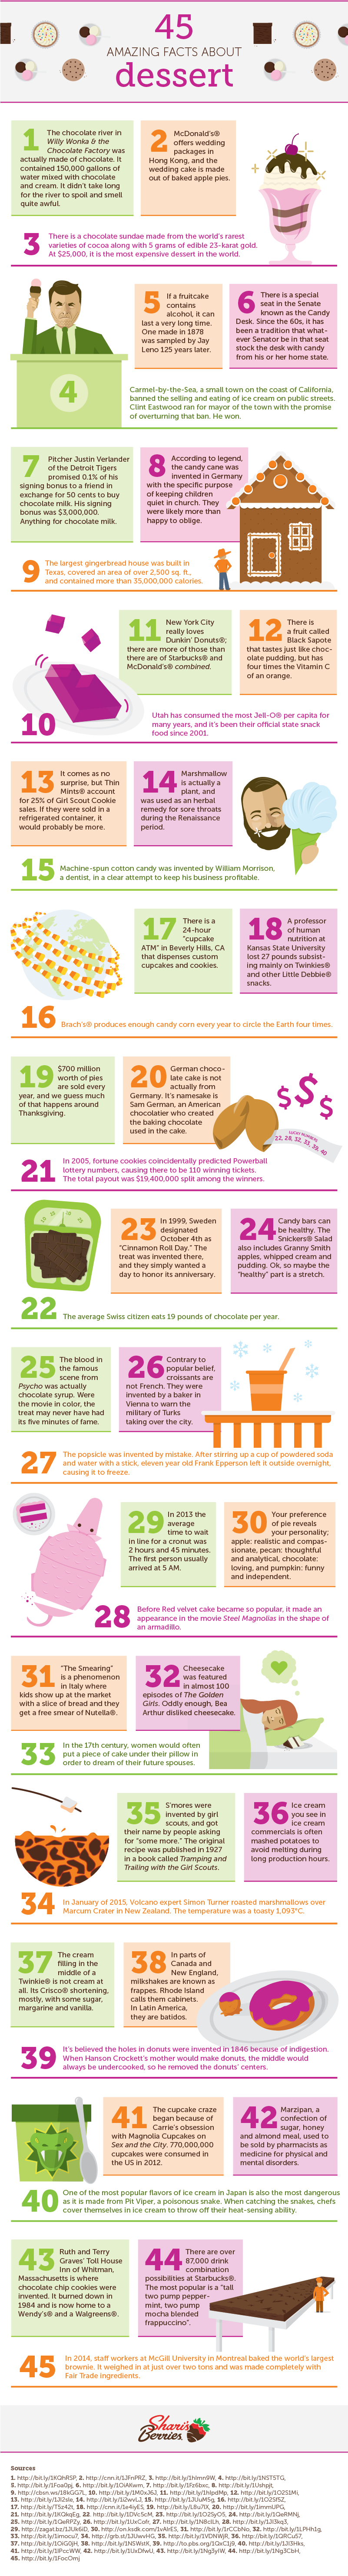 45 Amazing Facts About Dessert